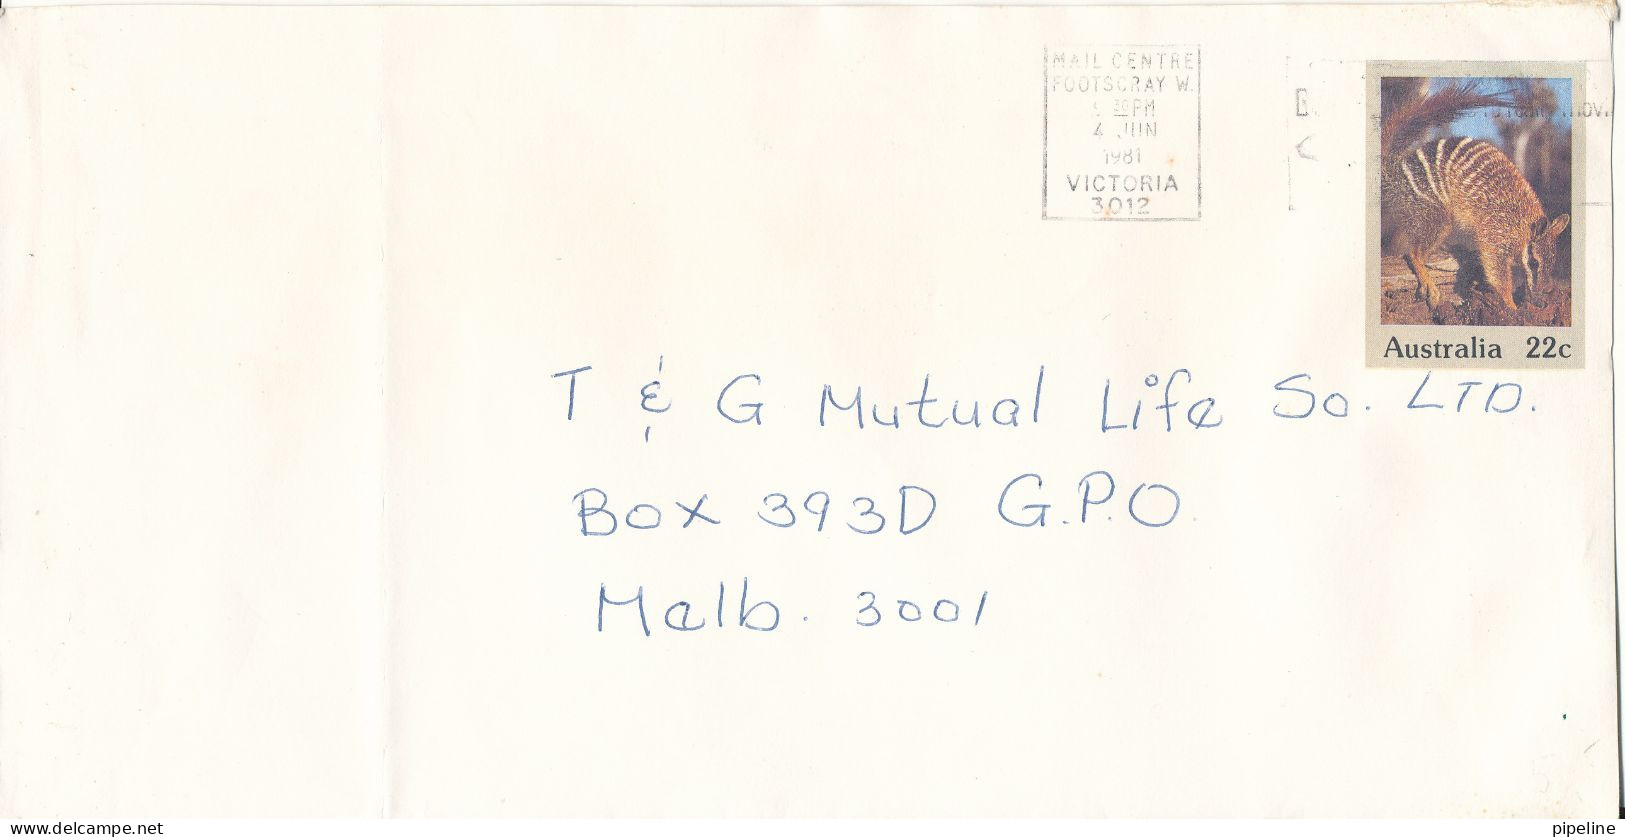 Australia Postal Stationery Cover Sent To Denmark Footscray 4-6-1981(the Cover Is Folded In The Left Side) - Postal Stationery